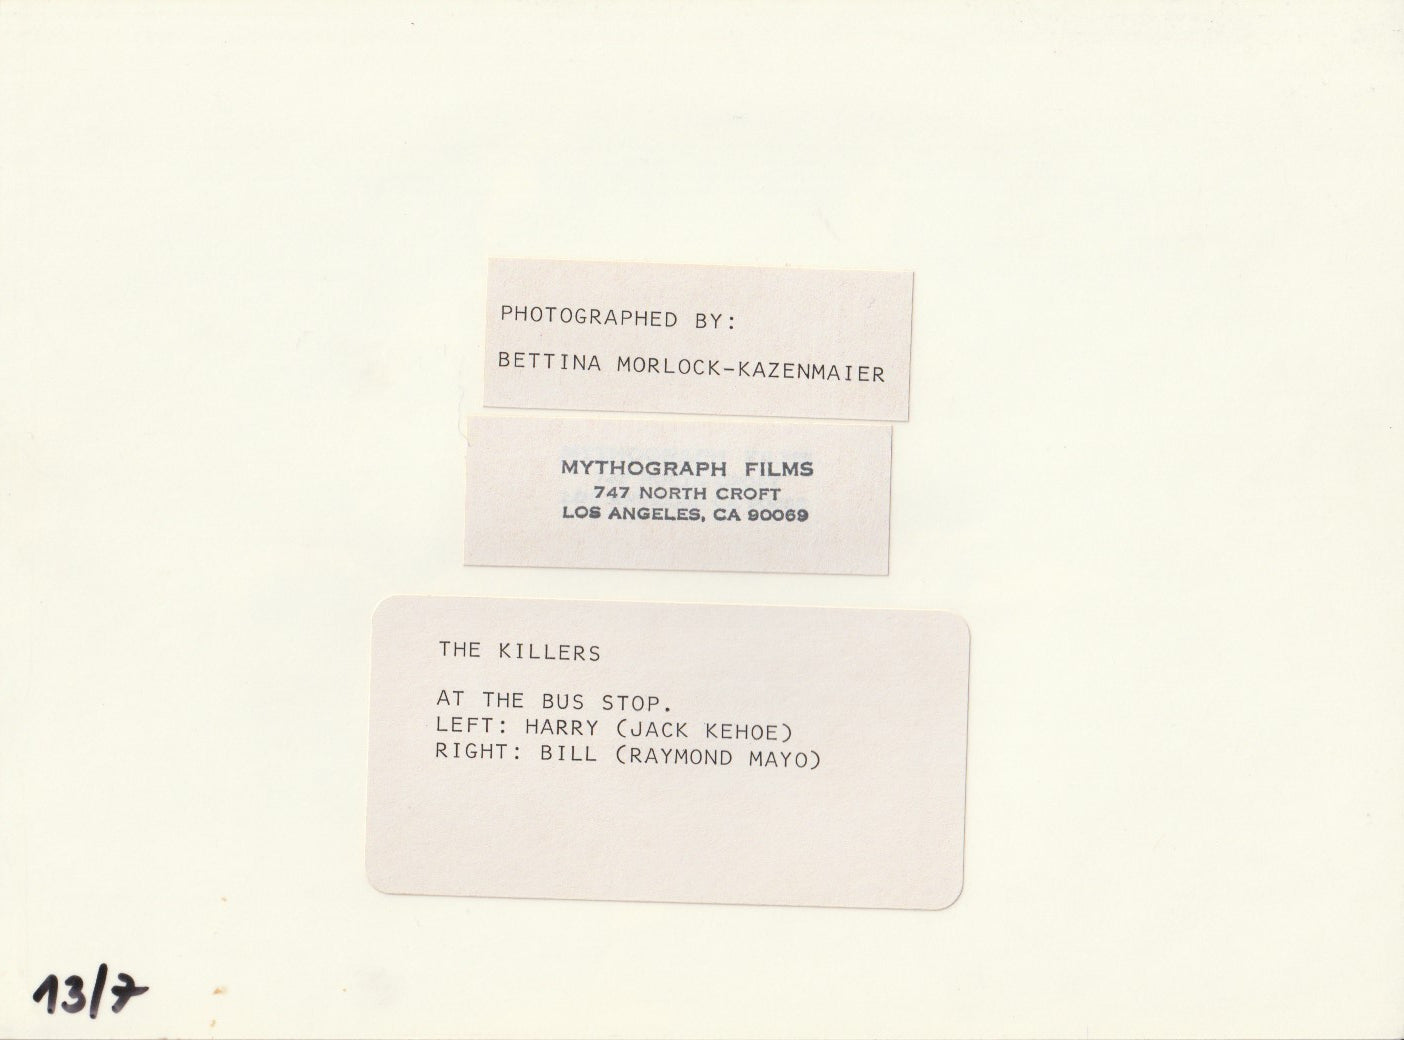 “THE KILLERS” starring Charles Bukowski: Short Film Promotional Package with Script, Bukowski Photographs, and Invitation to Premier (1984)